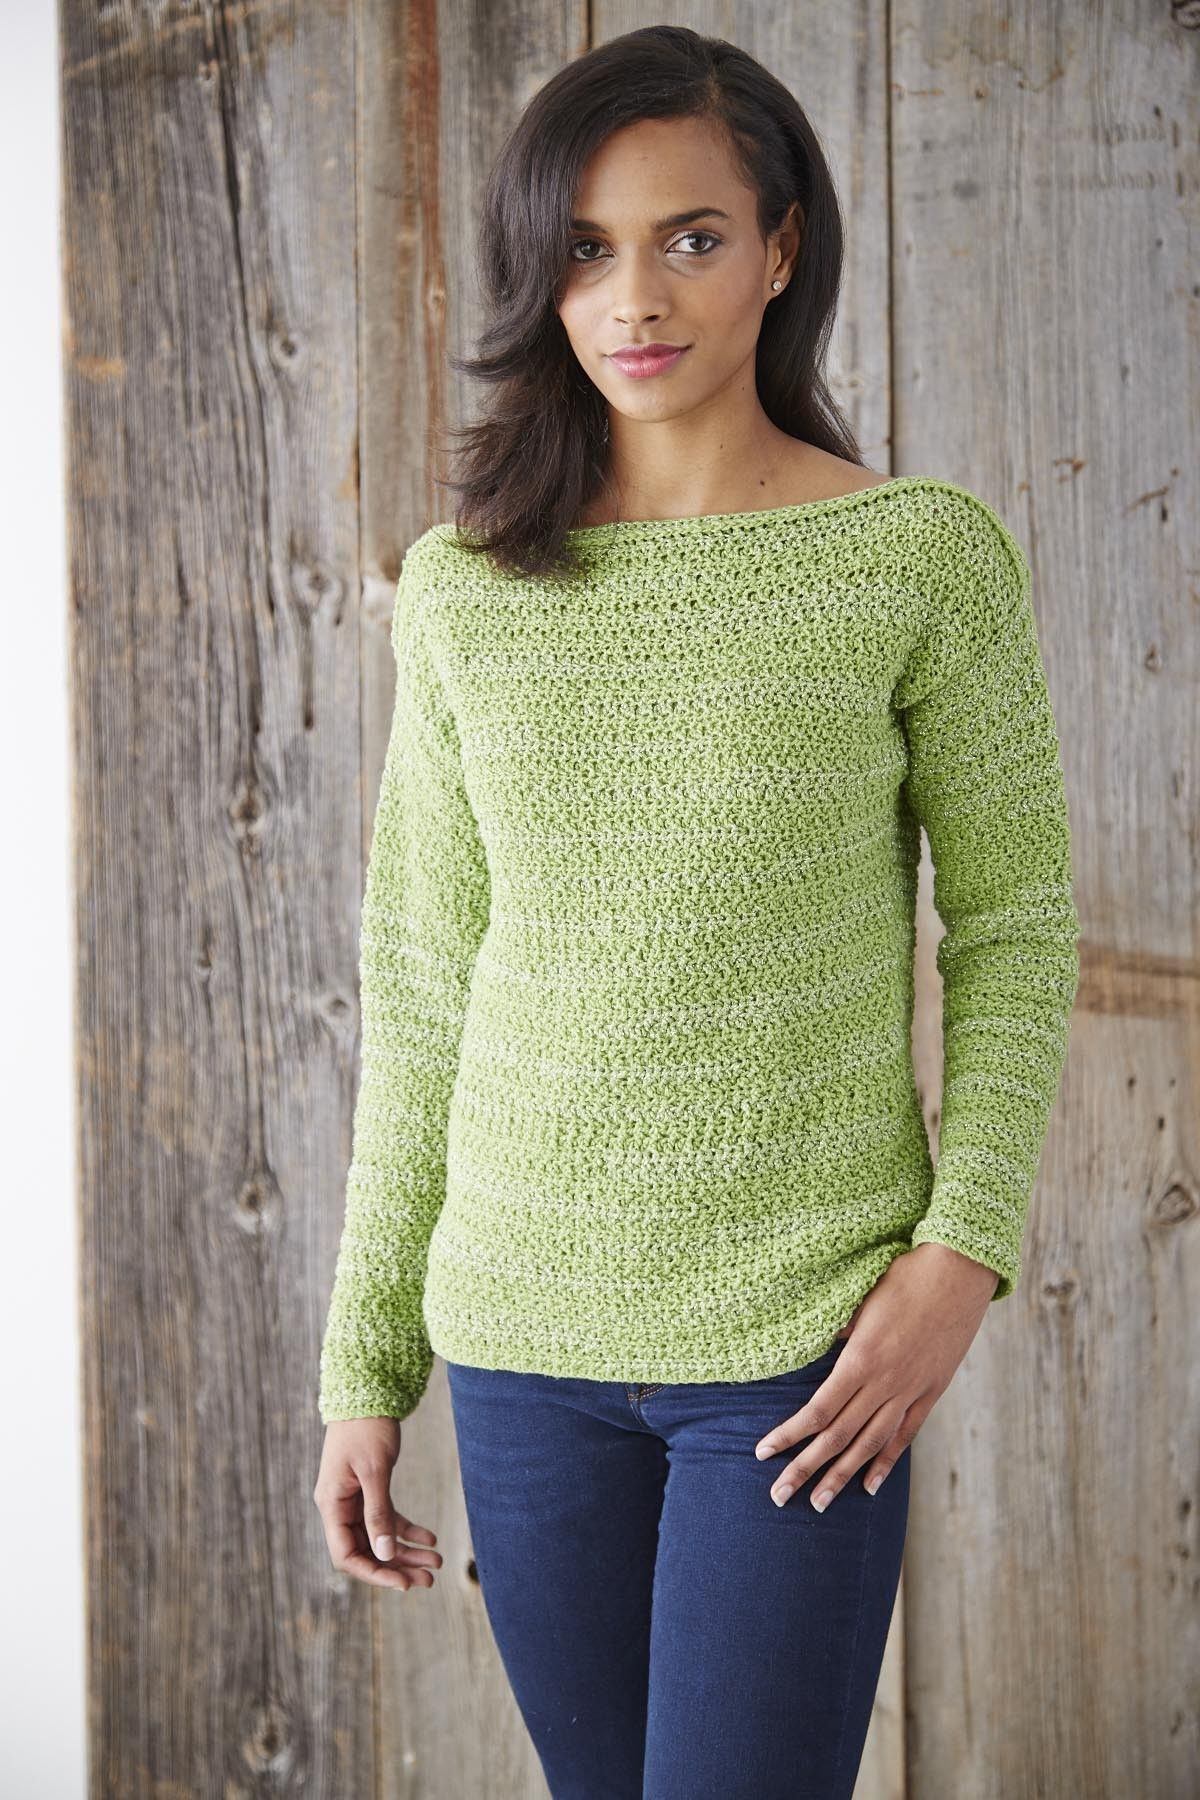 Easy Crochet Pullover Pattern Boat Neck Pullover Sweater Crafts Crochet Knitting Both Paid